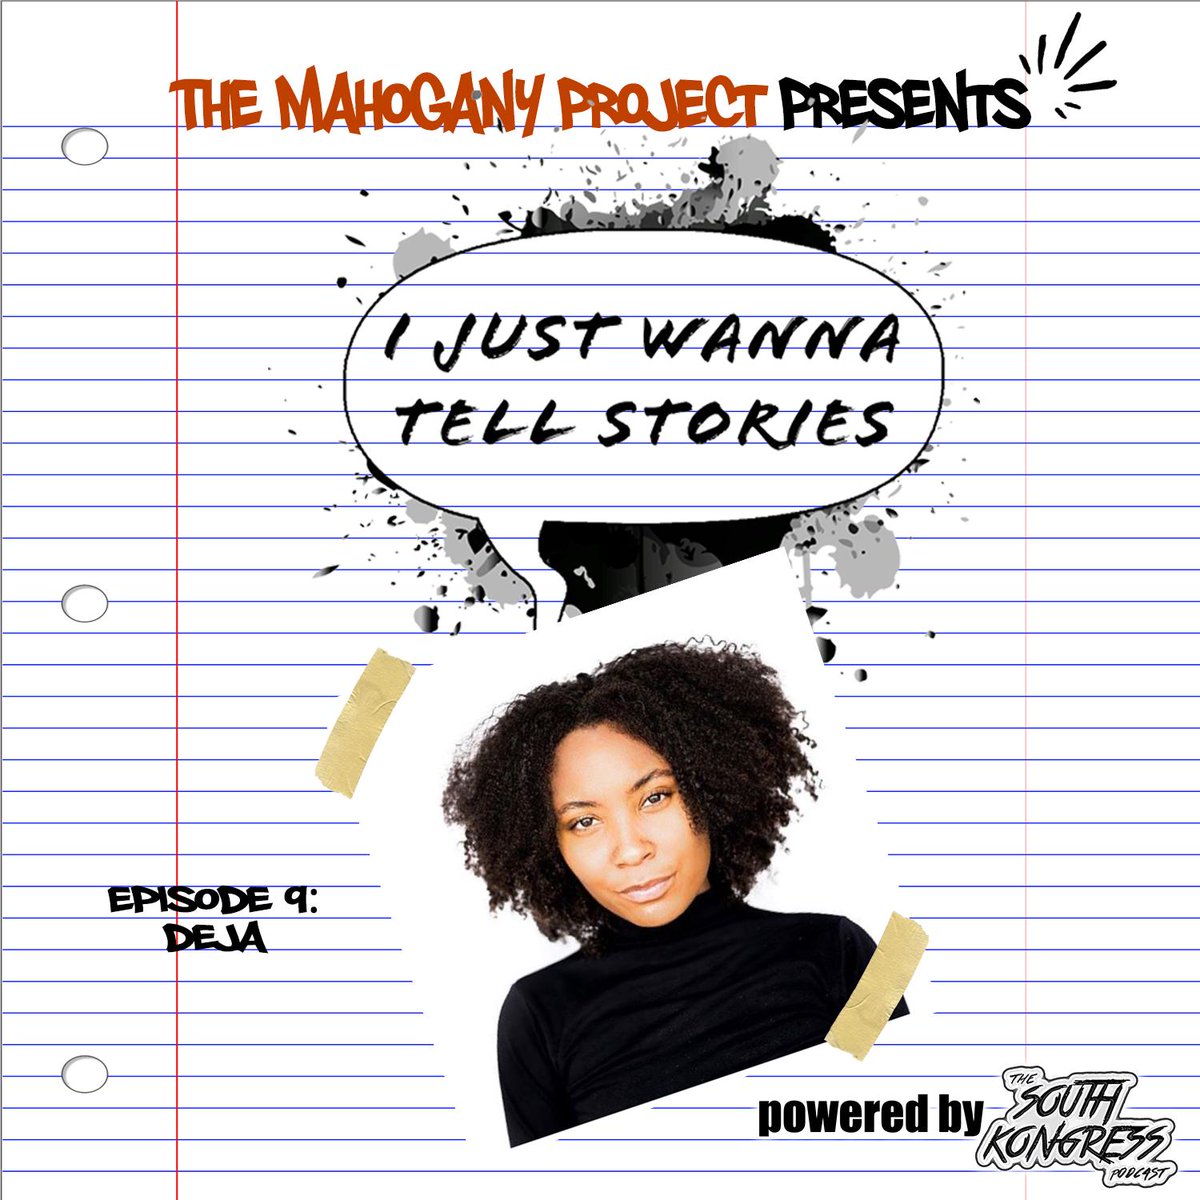 I Just Wanna Tell Stories Season 1 Episode 9 - Deja

SoundCloud: tinyurl.com/y44rvy8q

Spotify: tinyurl.com/y4l5689g

Apple Podcasts: tinyurl.com/y6kjcbhg

Presented by @MahoganyProject 

Powered by @SouthKongress